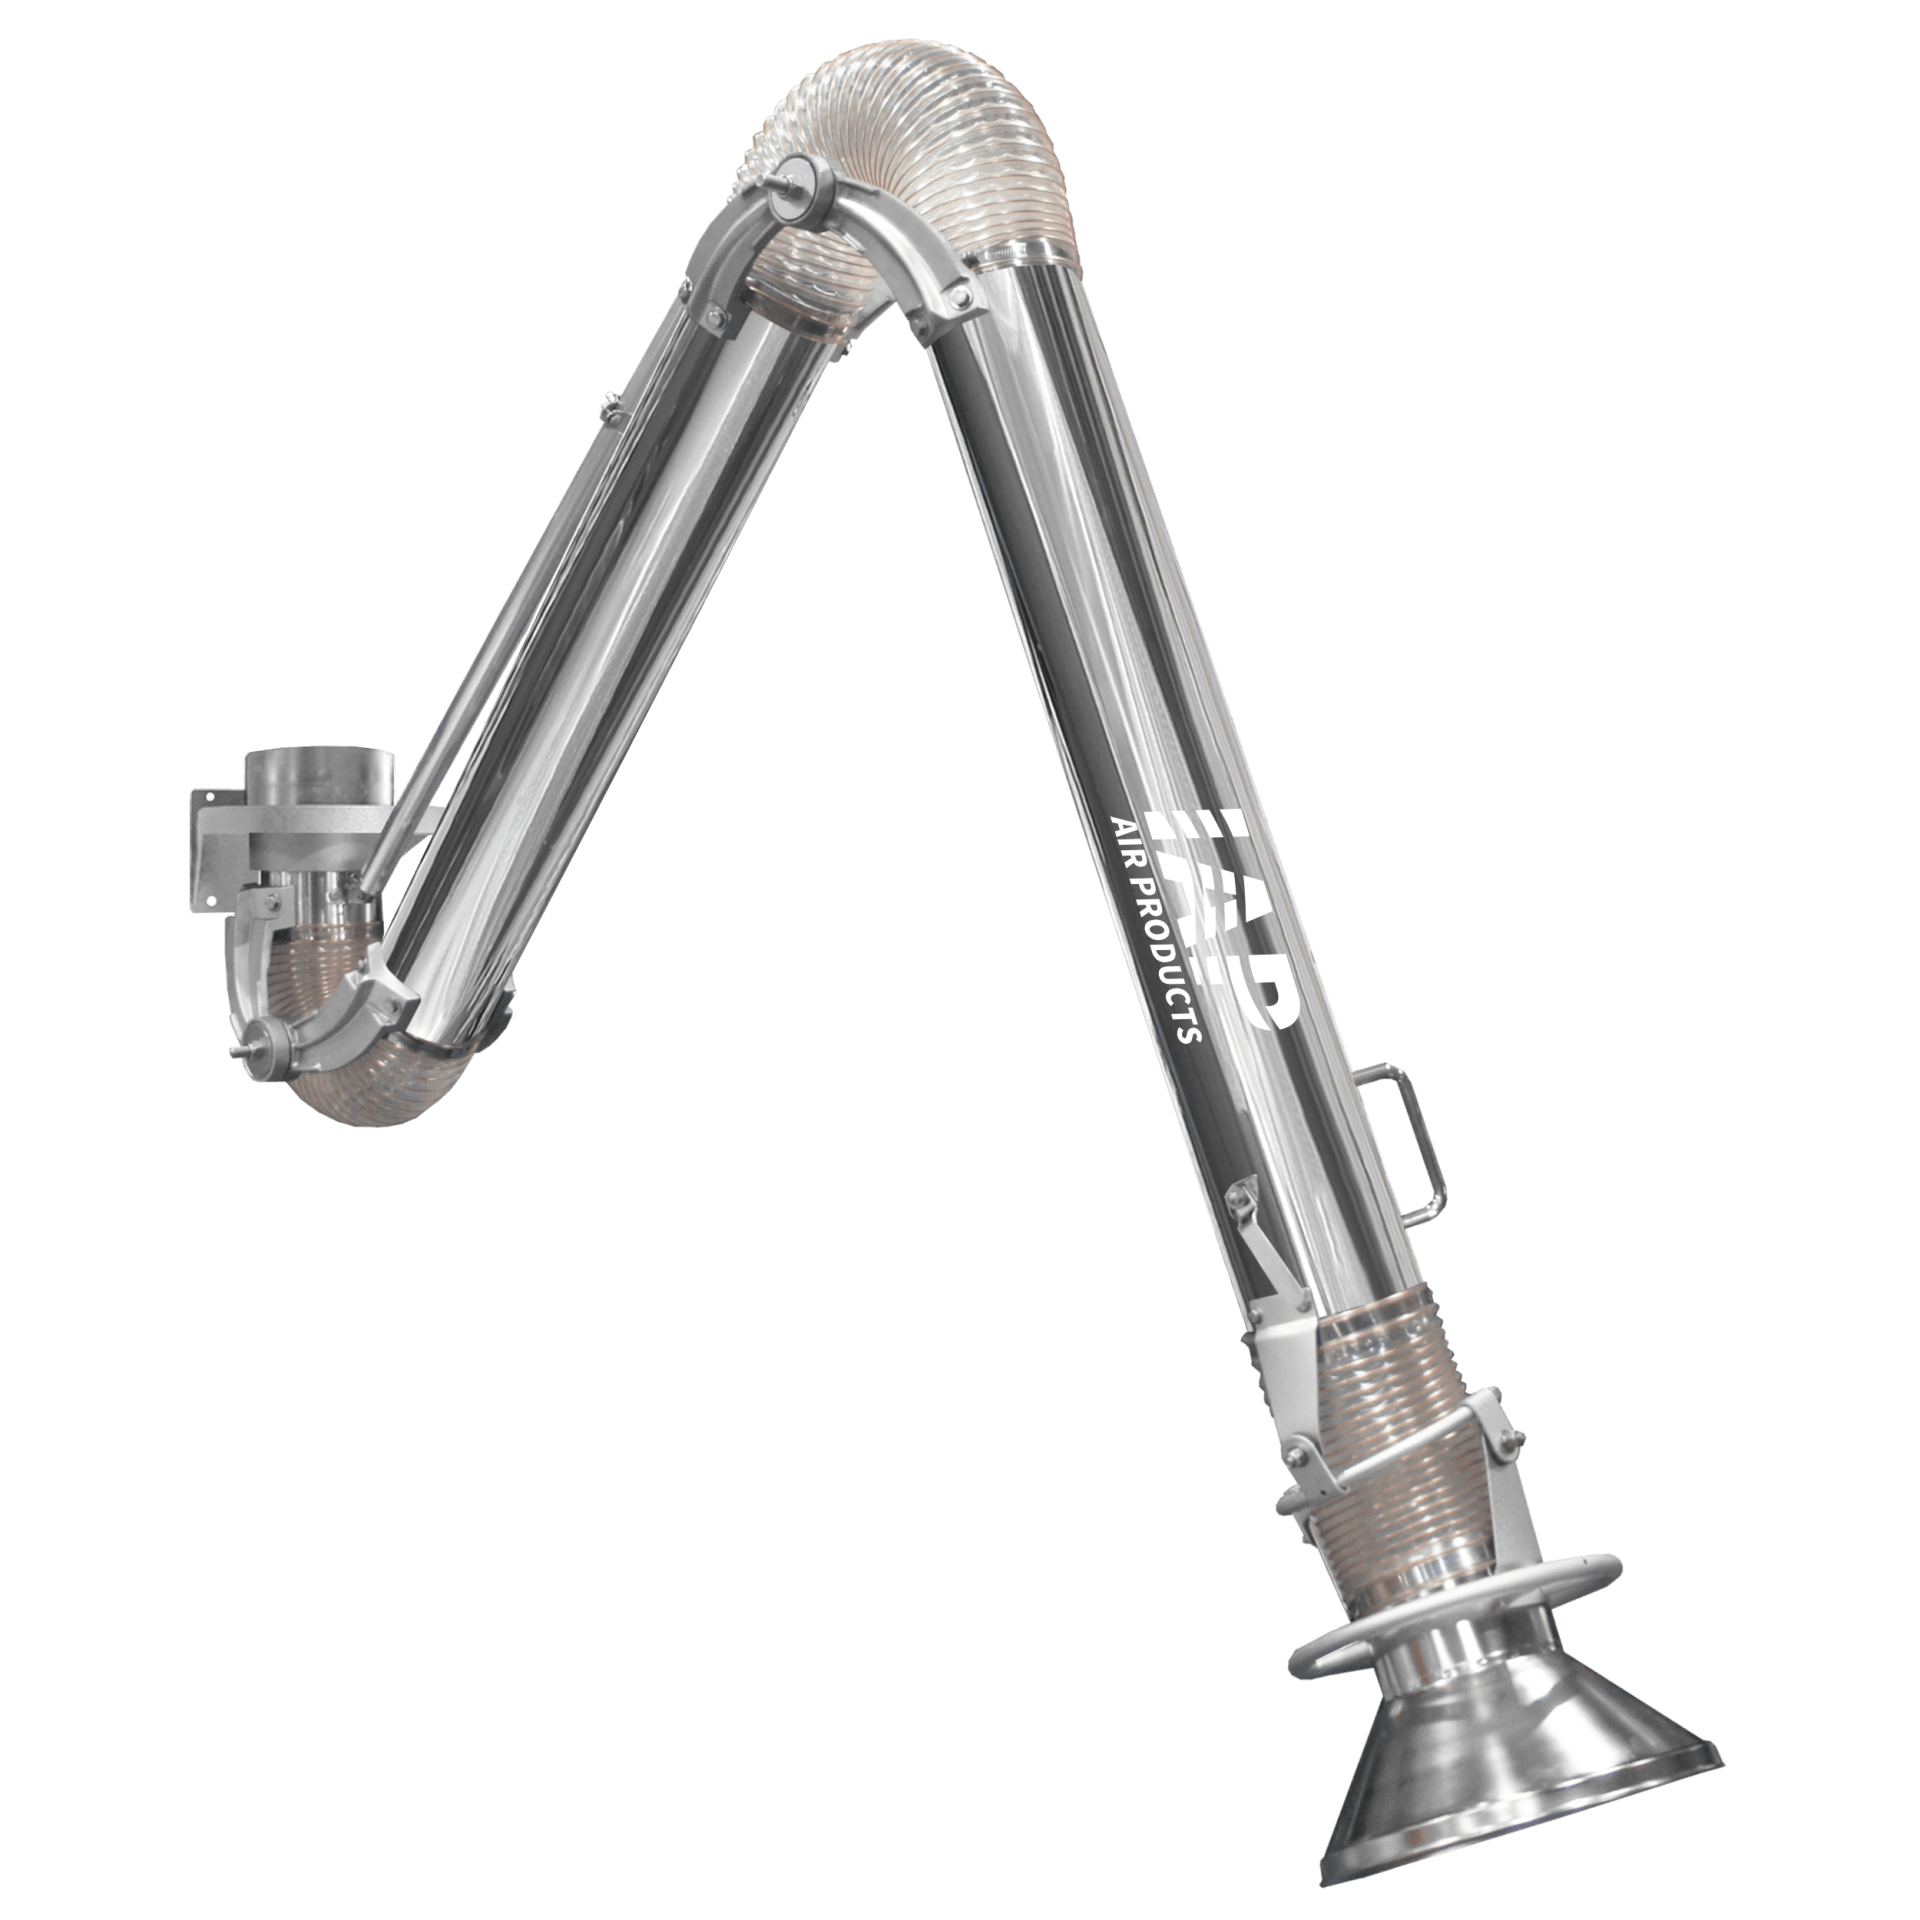 IAP Stainless steel welding fume extraction arms